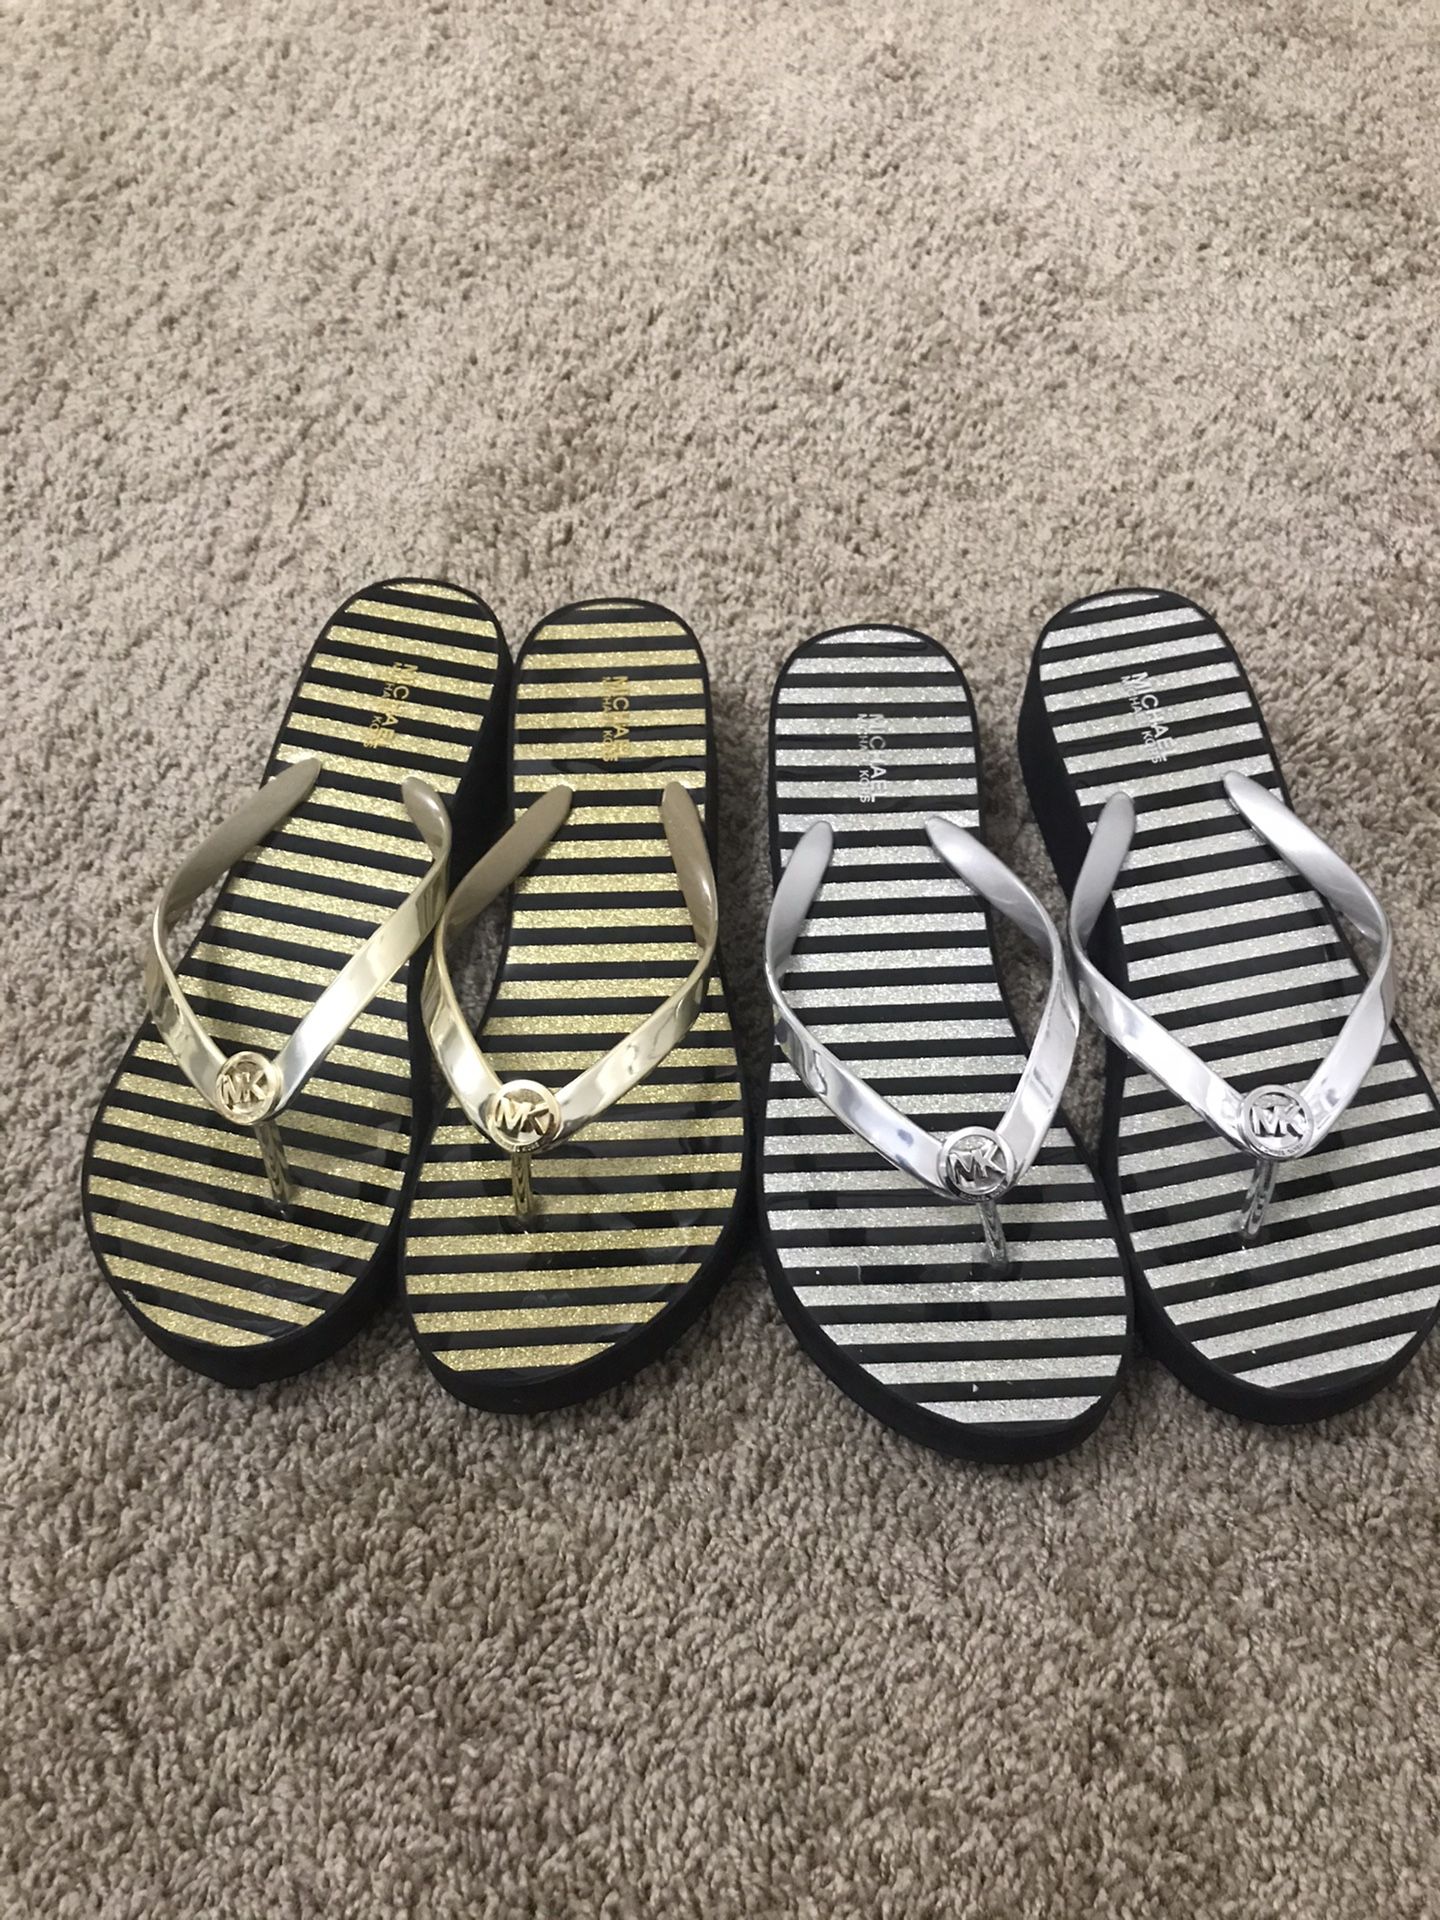 2 pairs like new Michael kors sandals gold silver size 9